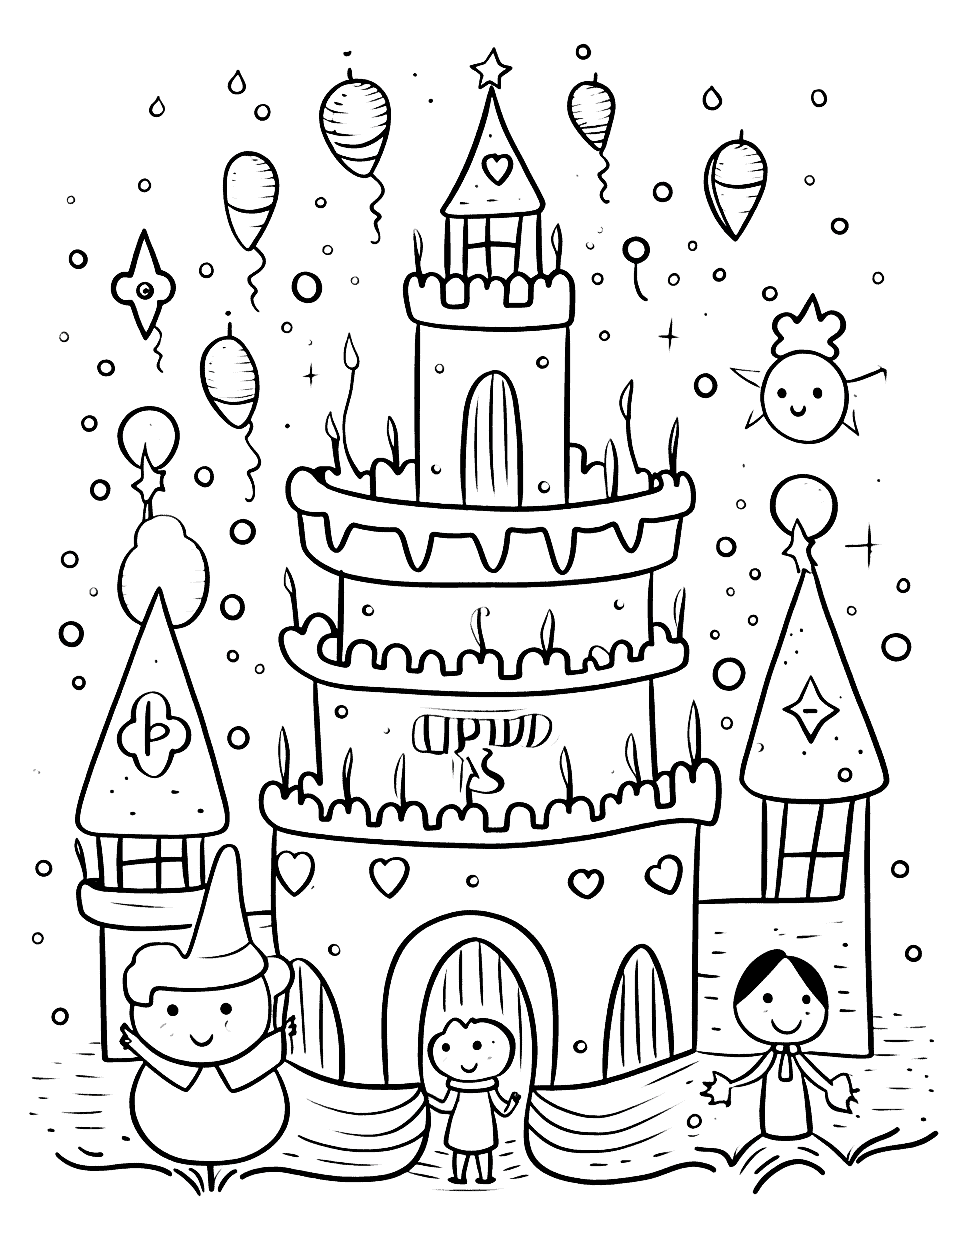 Fairy-tale Birthday Happy Coloring Page - Characters gathering for a birthday celebration.